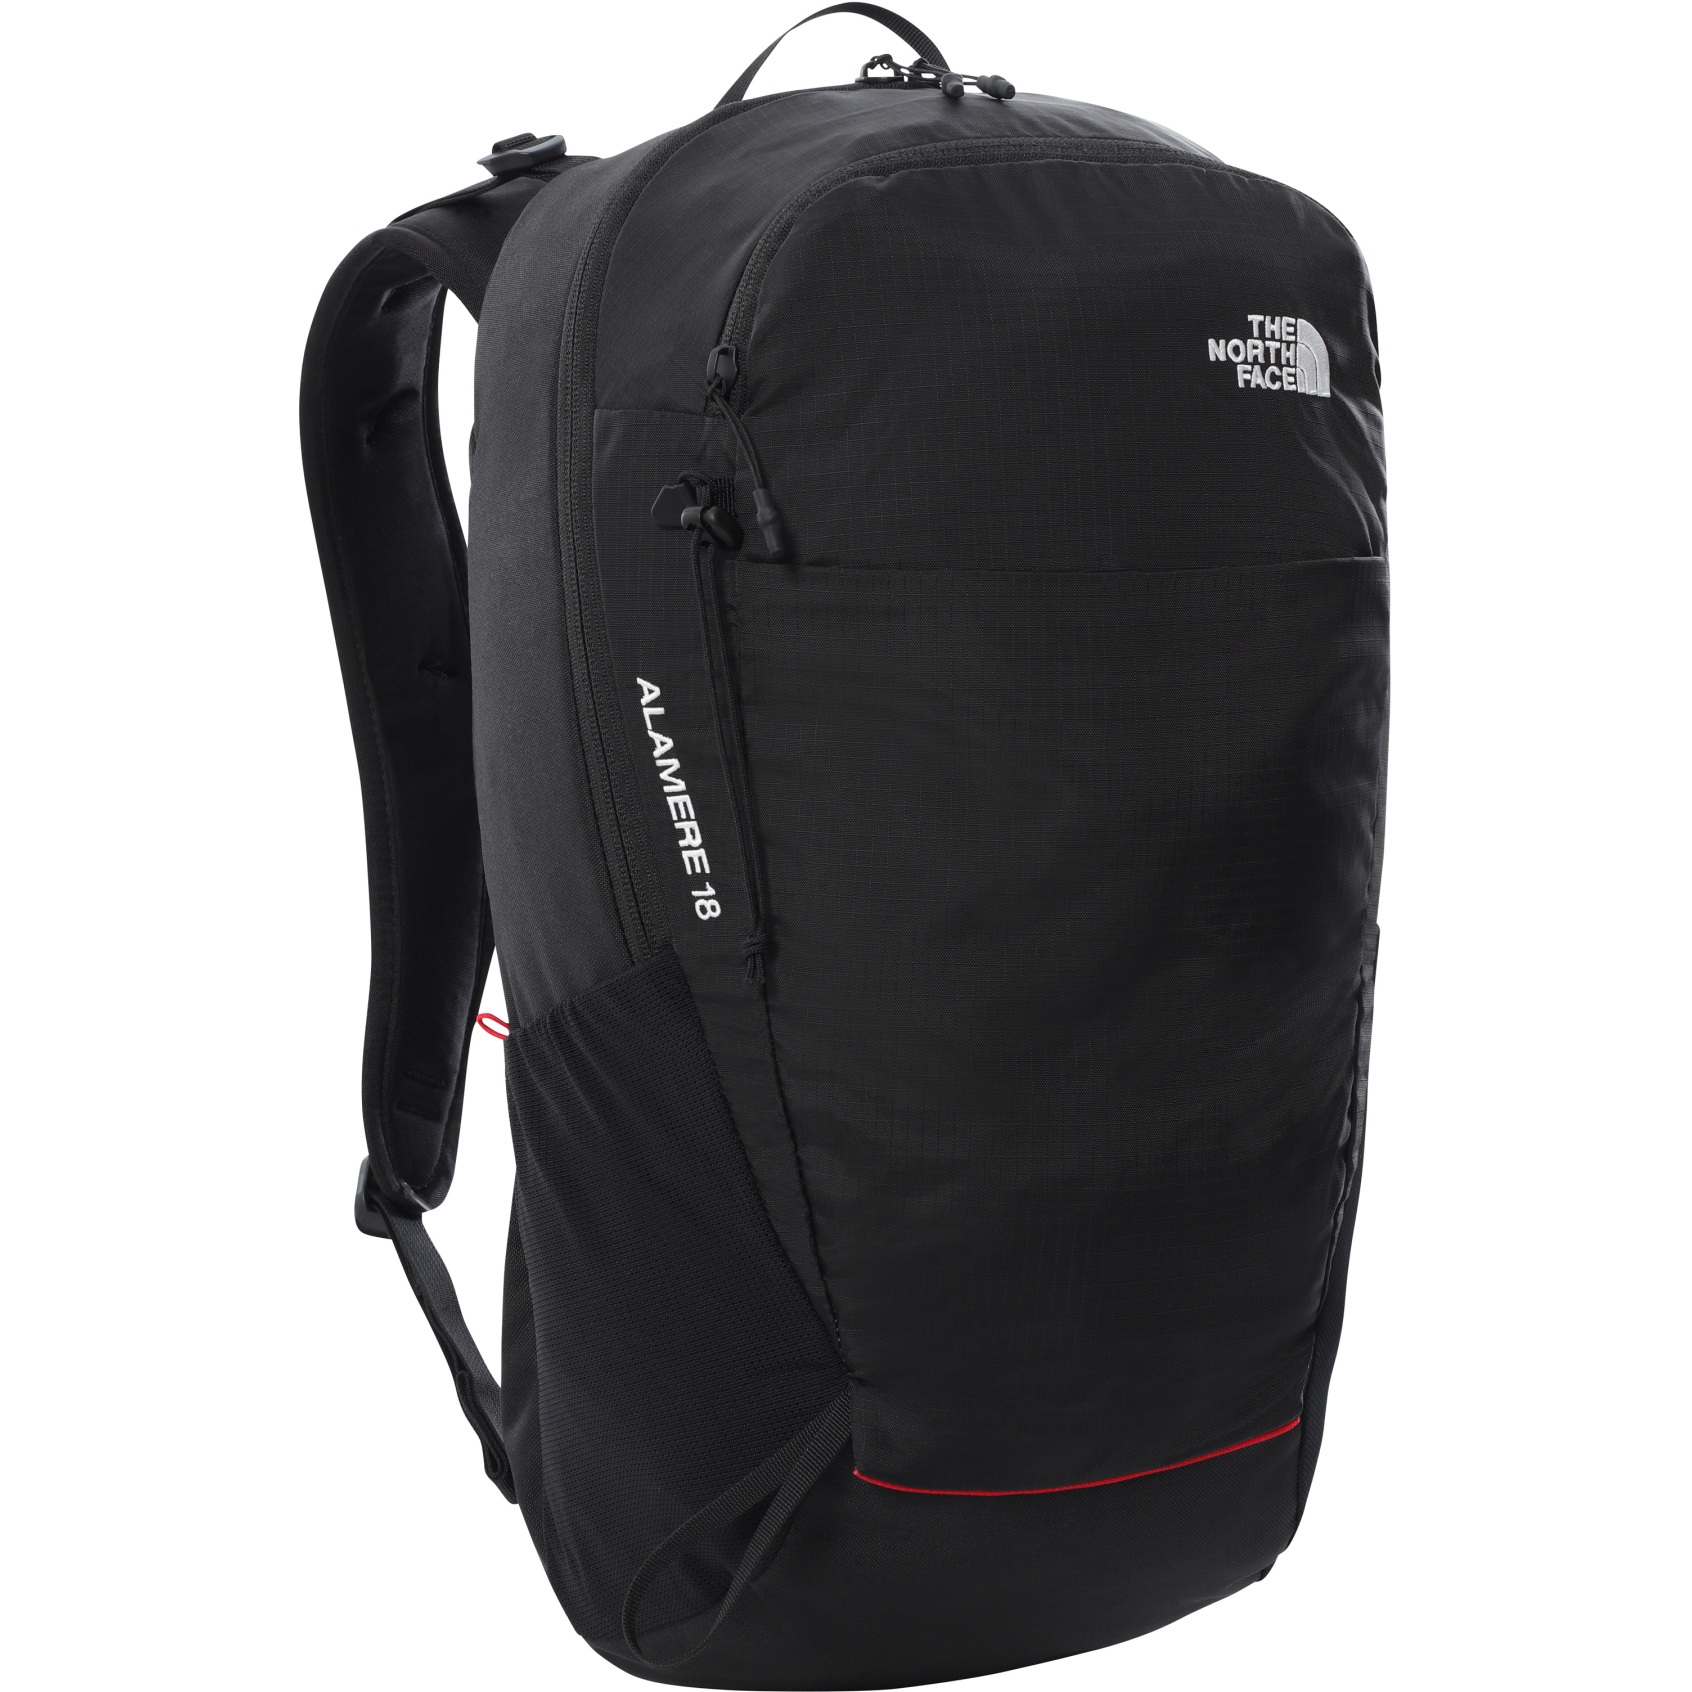 Picture of The North Face Basin 18L Backpack - TNF Black/TNF Black